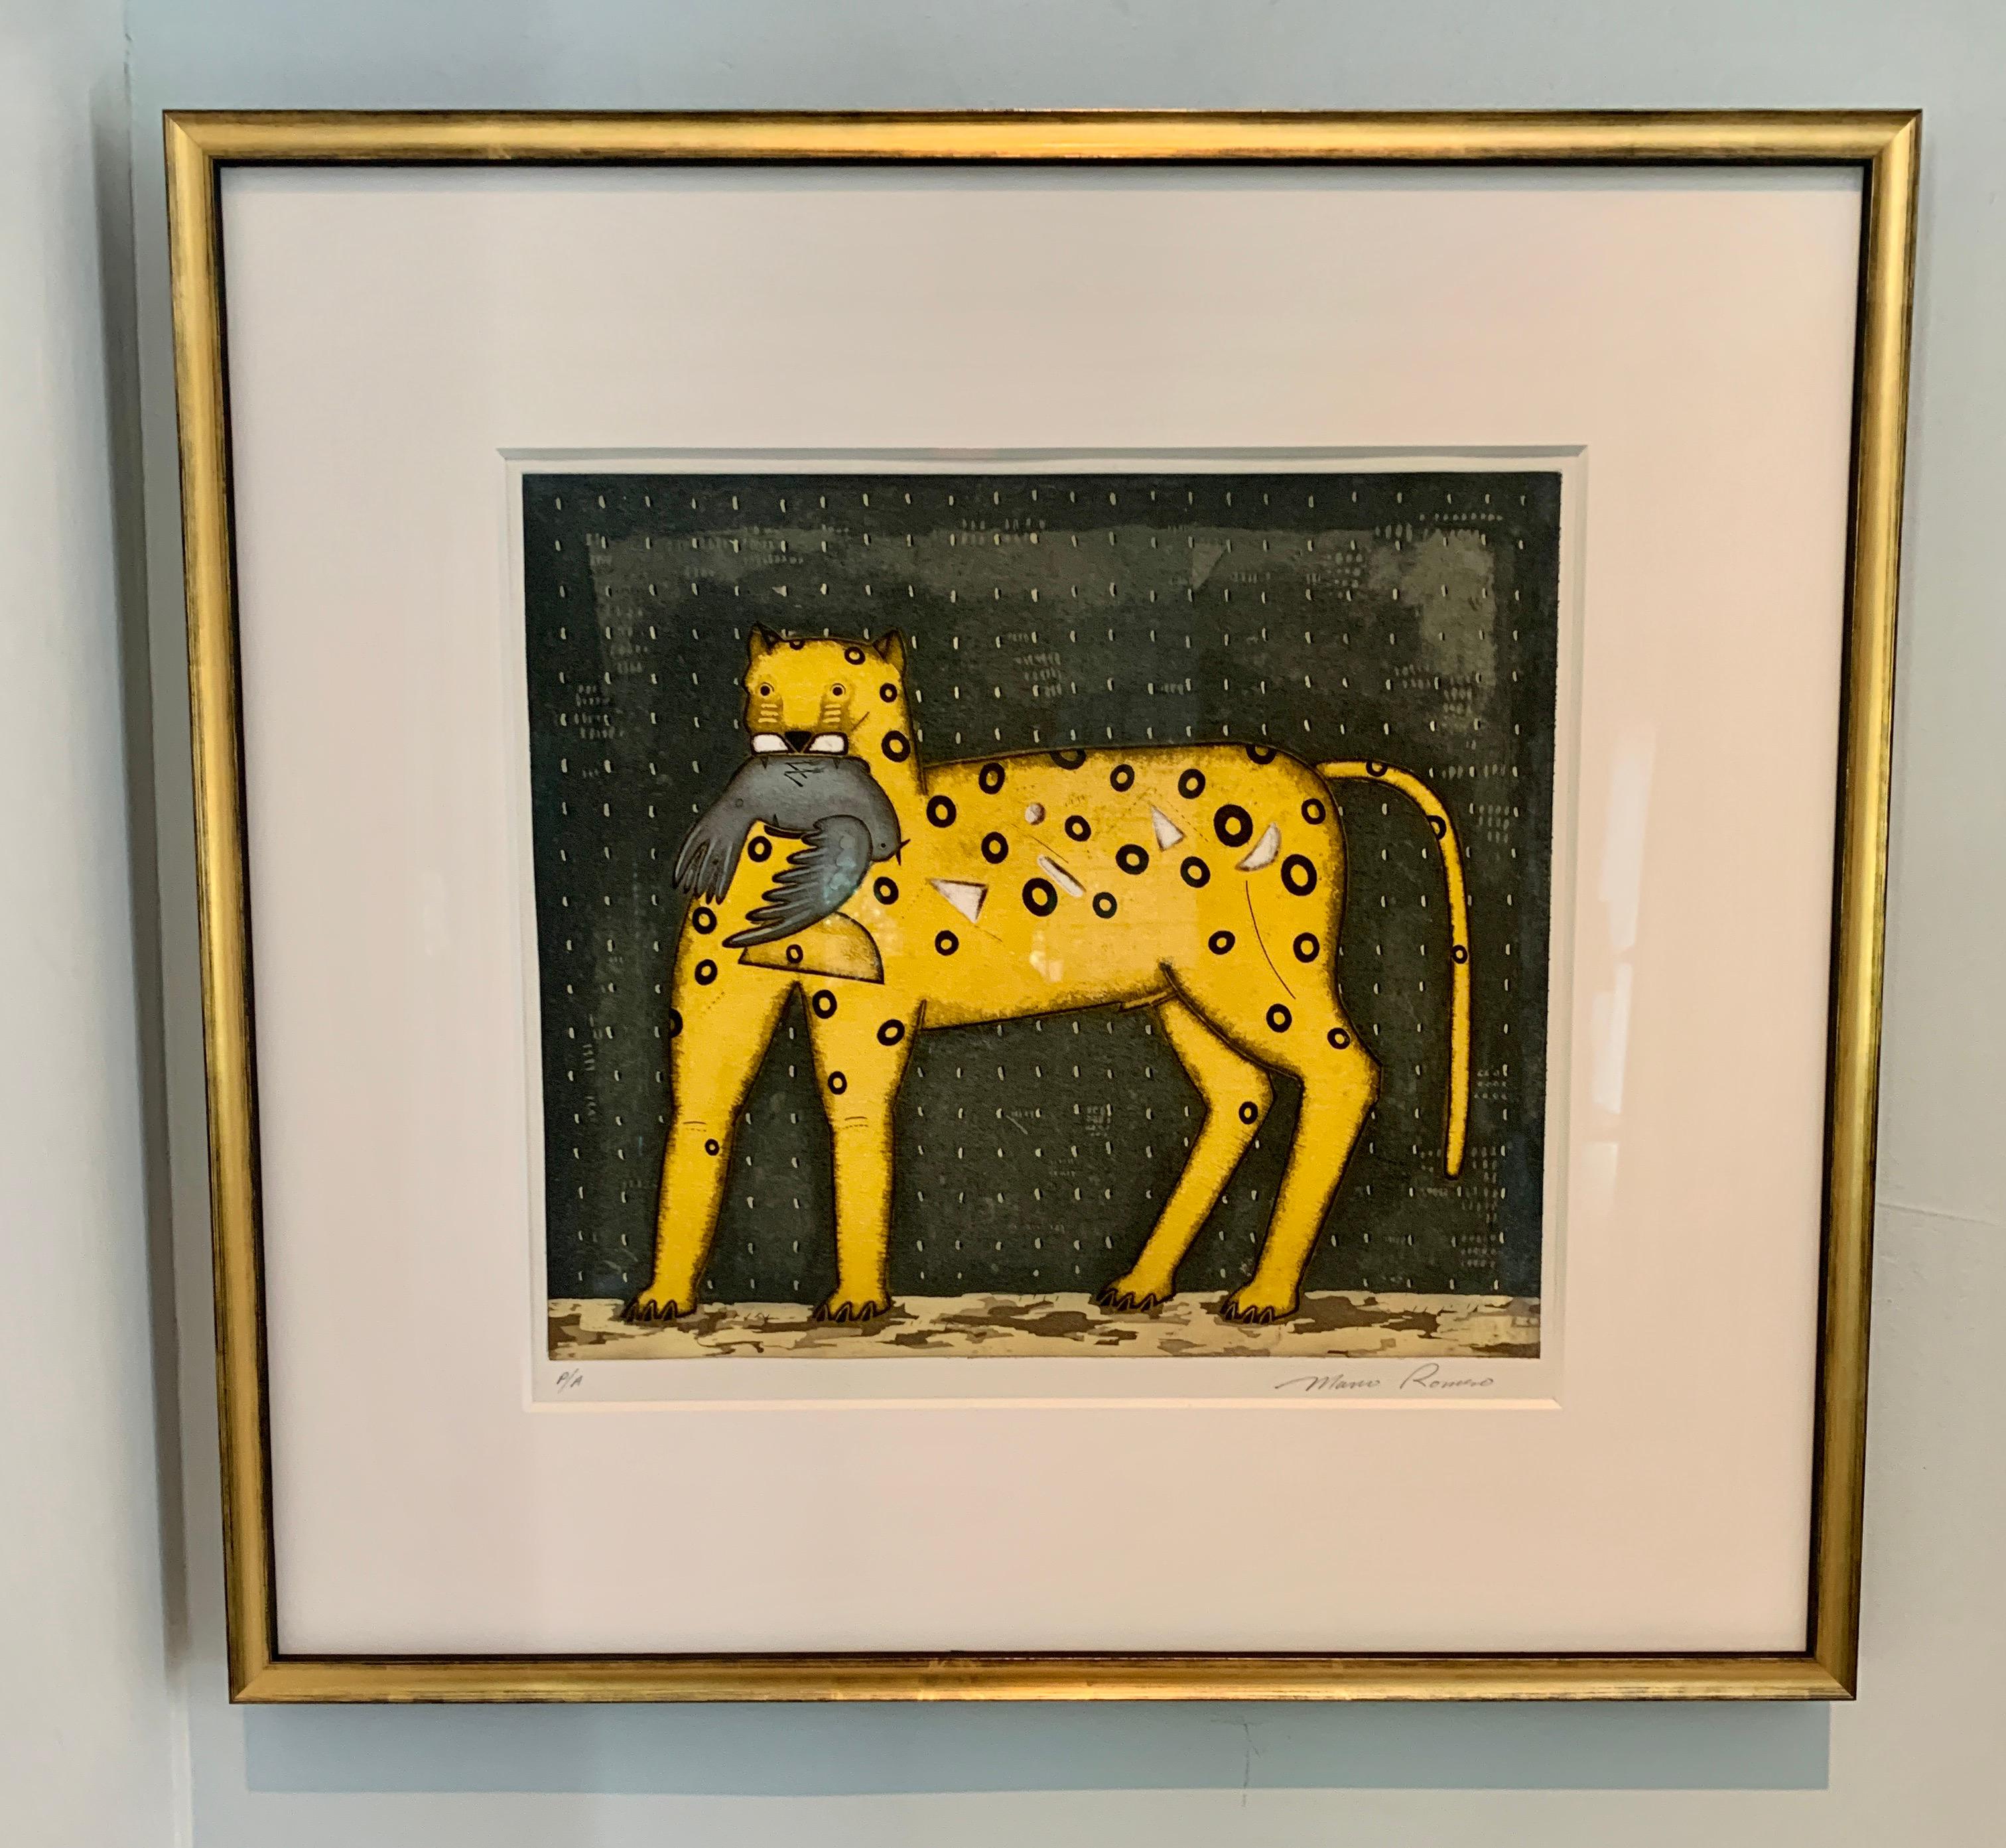 Modern Framed Mexican Lithograph of Yellow Cat and Bird by Mario Romero